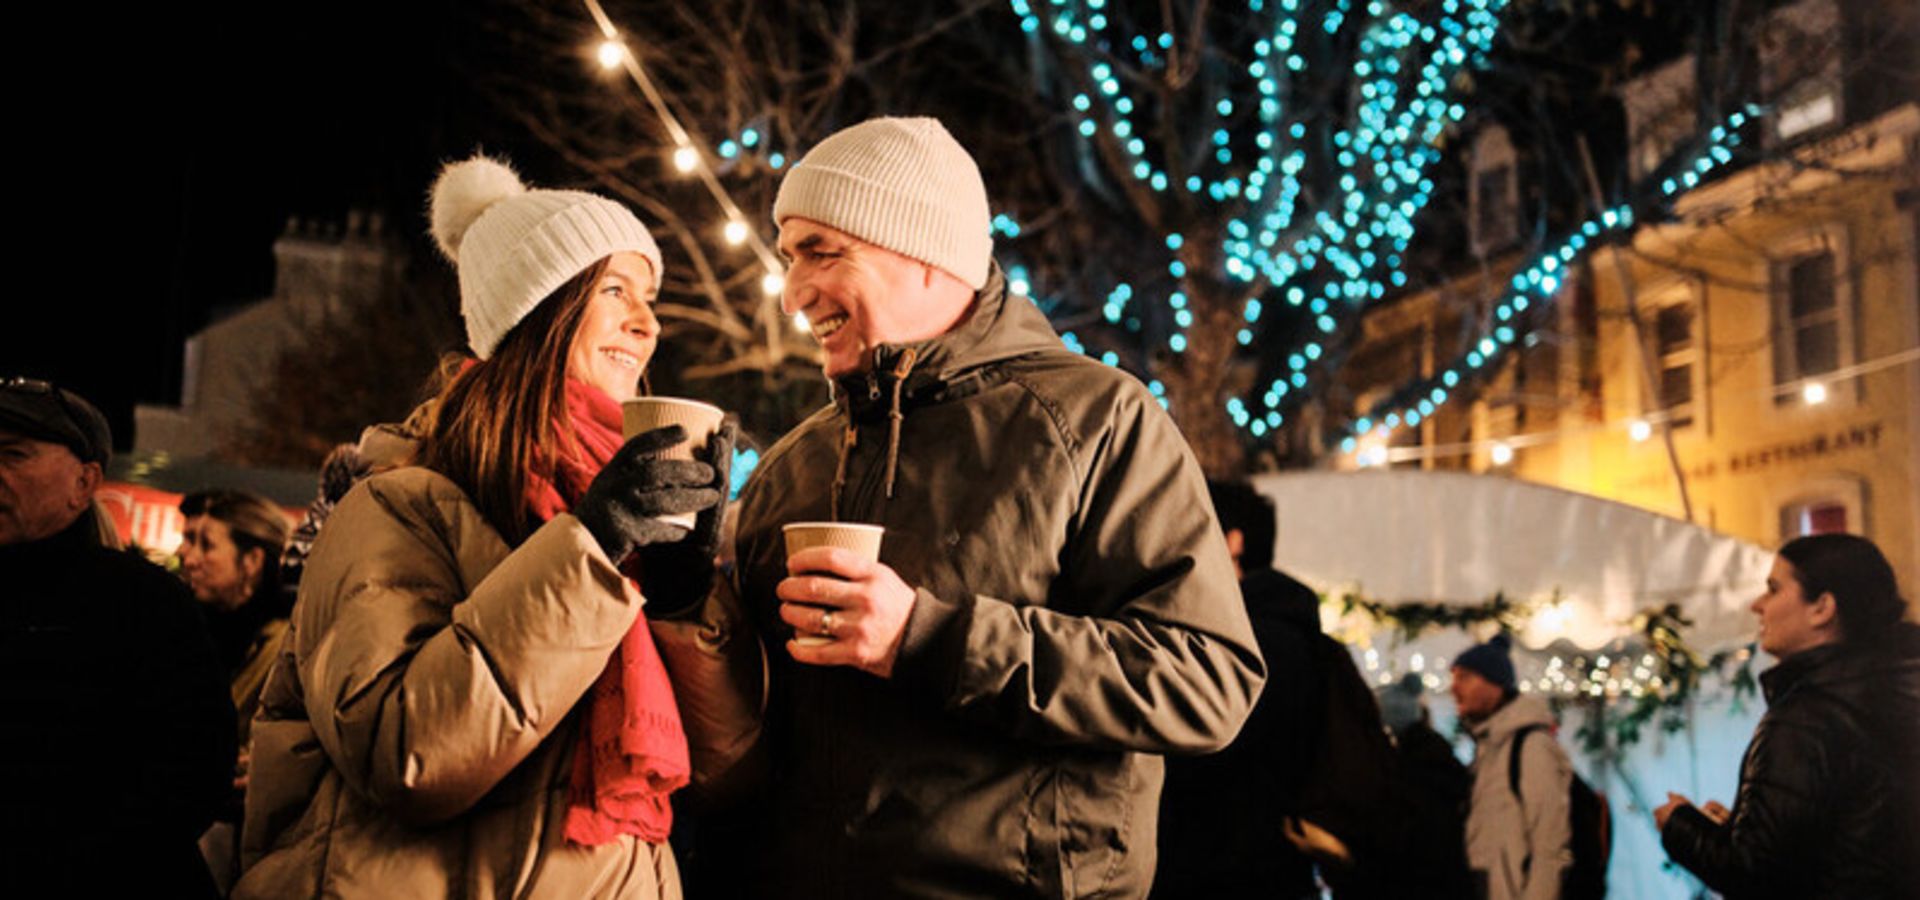 Couple smiling each other. They are wearing warm, wooly, coats are are surrounded by people and bright Christmas lights.